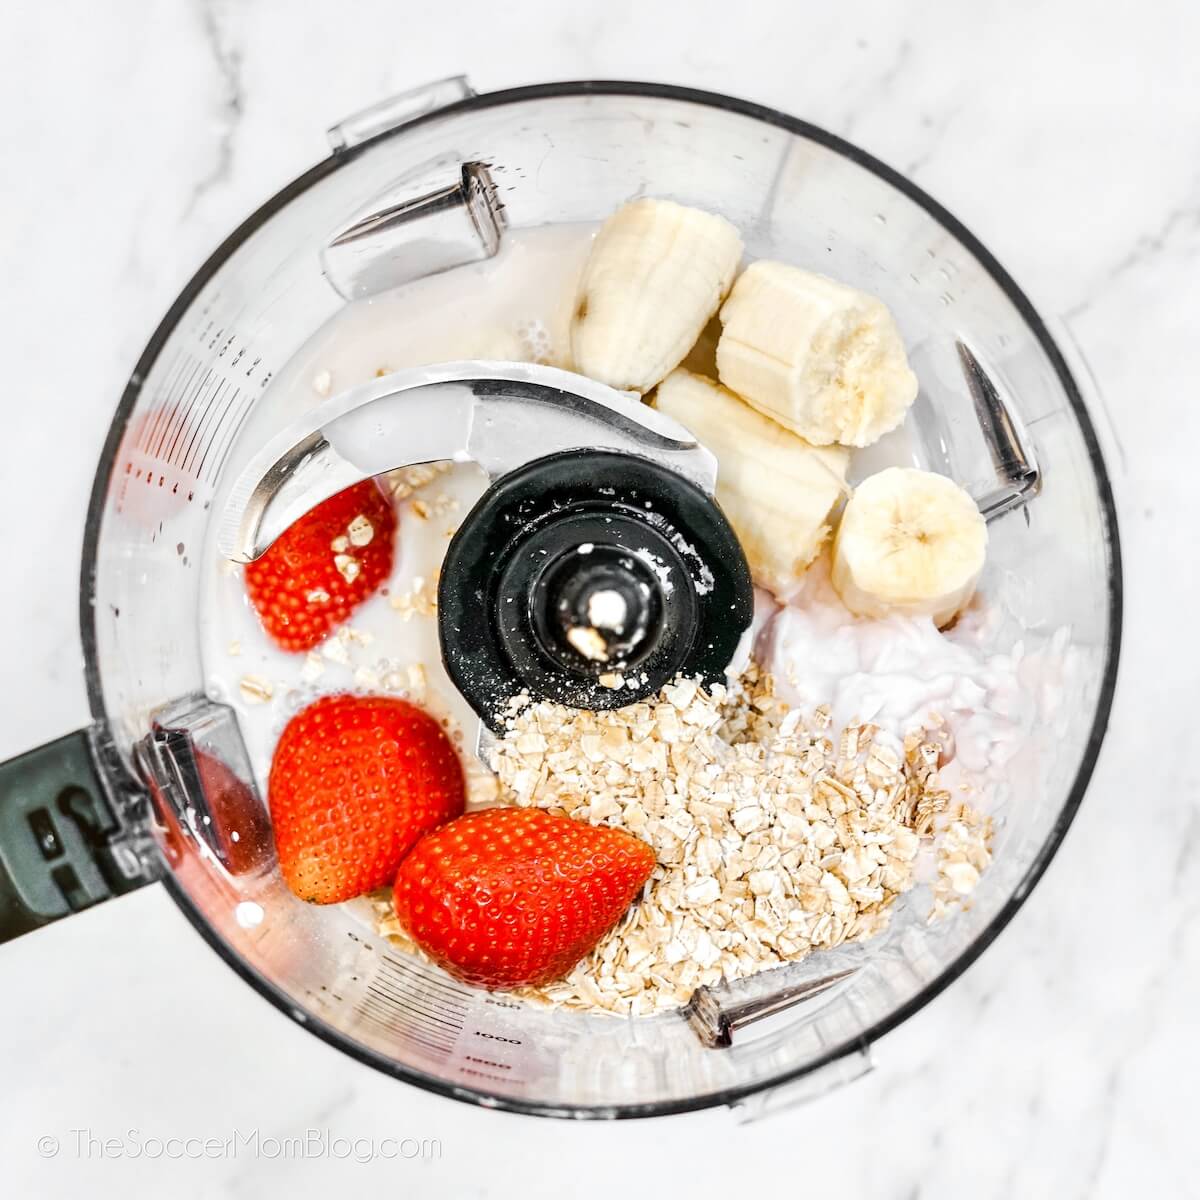 Top-down view of Strawberries, Bananas, and rolled oats in a blender